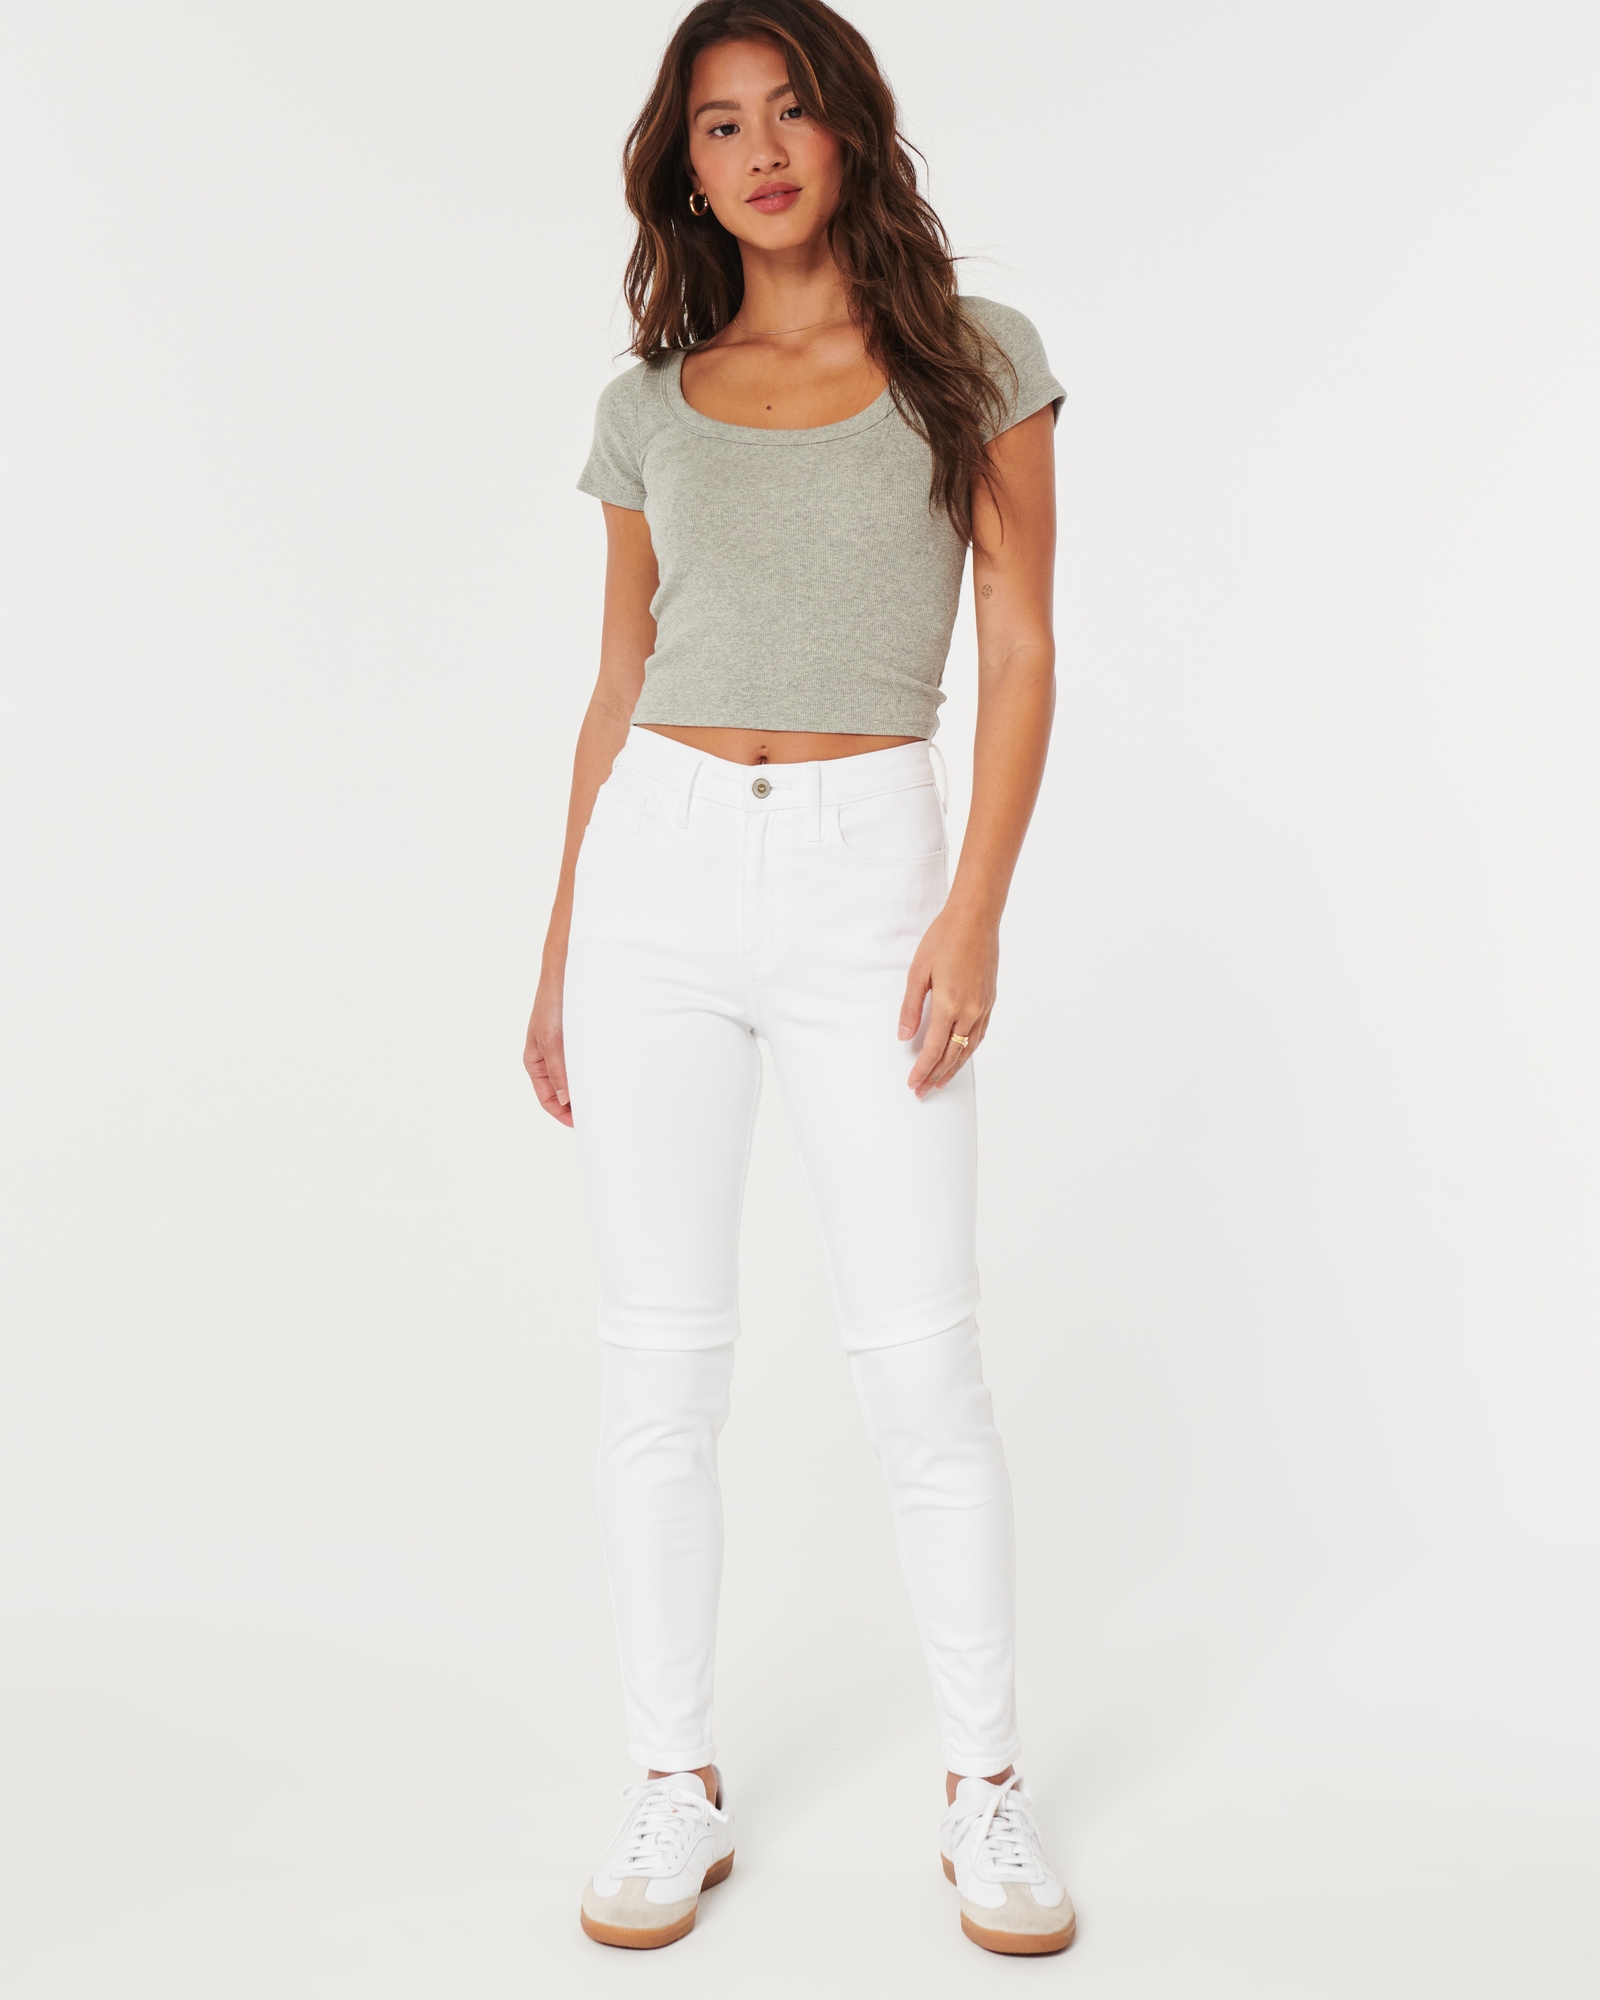 Hollister White High Rise Jean Leggings Size undefined - $16 - From Elyssa